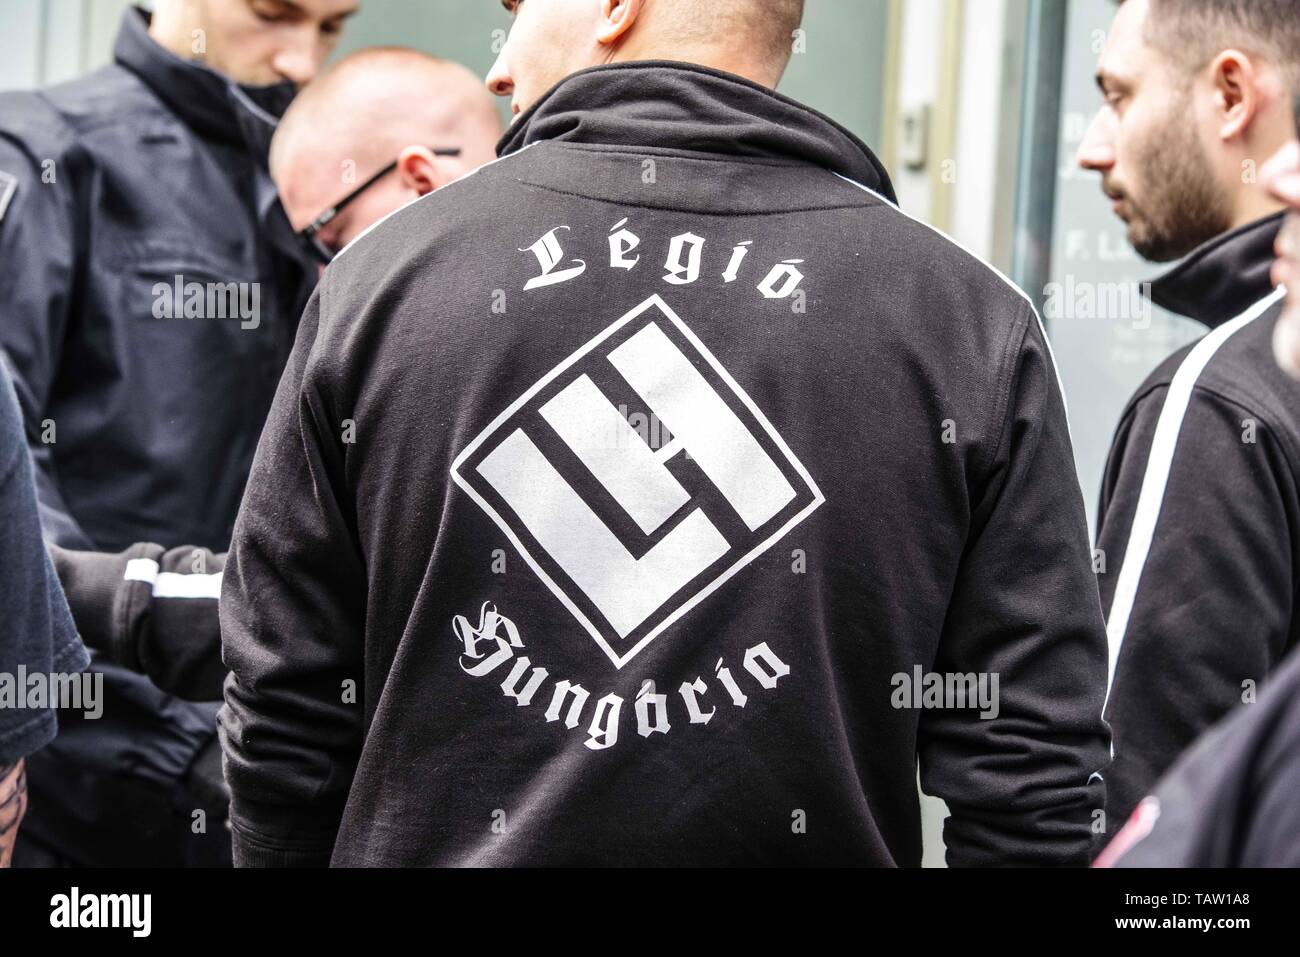 Dortmund, Nordrhein Westfalen, Germany. 25th May, 2019. Symbol of a Hungarian neonazi group ''Legio Hungaria''. Prior to the European Elections, the neonazi party Die Rechte (The Right) organized a rally in the German city of Dortmund to promote their candidate, the incarcerated Holocaust denier Ursula Haverbeck. The demonstration and march were organized by prominent local political figure and neonazi activist Michael Brueck (Michael BrÃ¼ck) who enlisted the help of not only German neonazis, but also assistance from Russian, Bulgarian, Hungarian, and Dutch groups with the final tally rangin Stock Photo